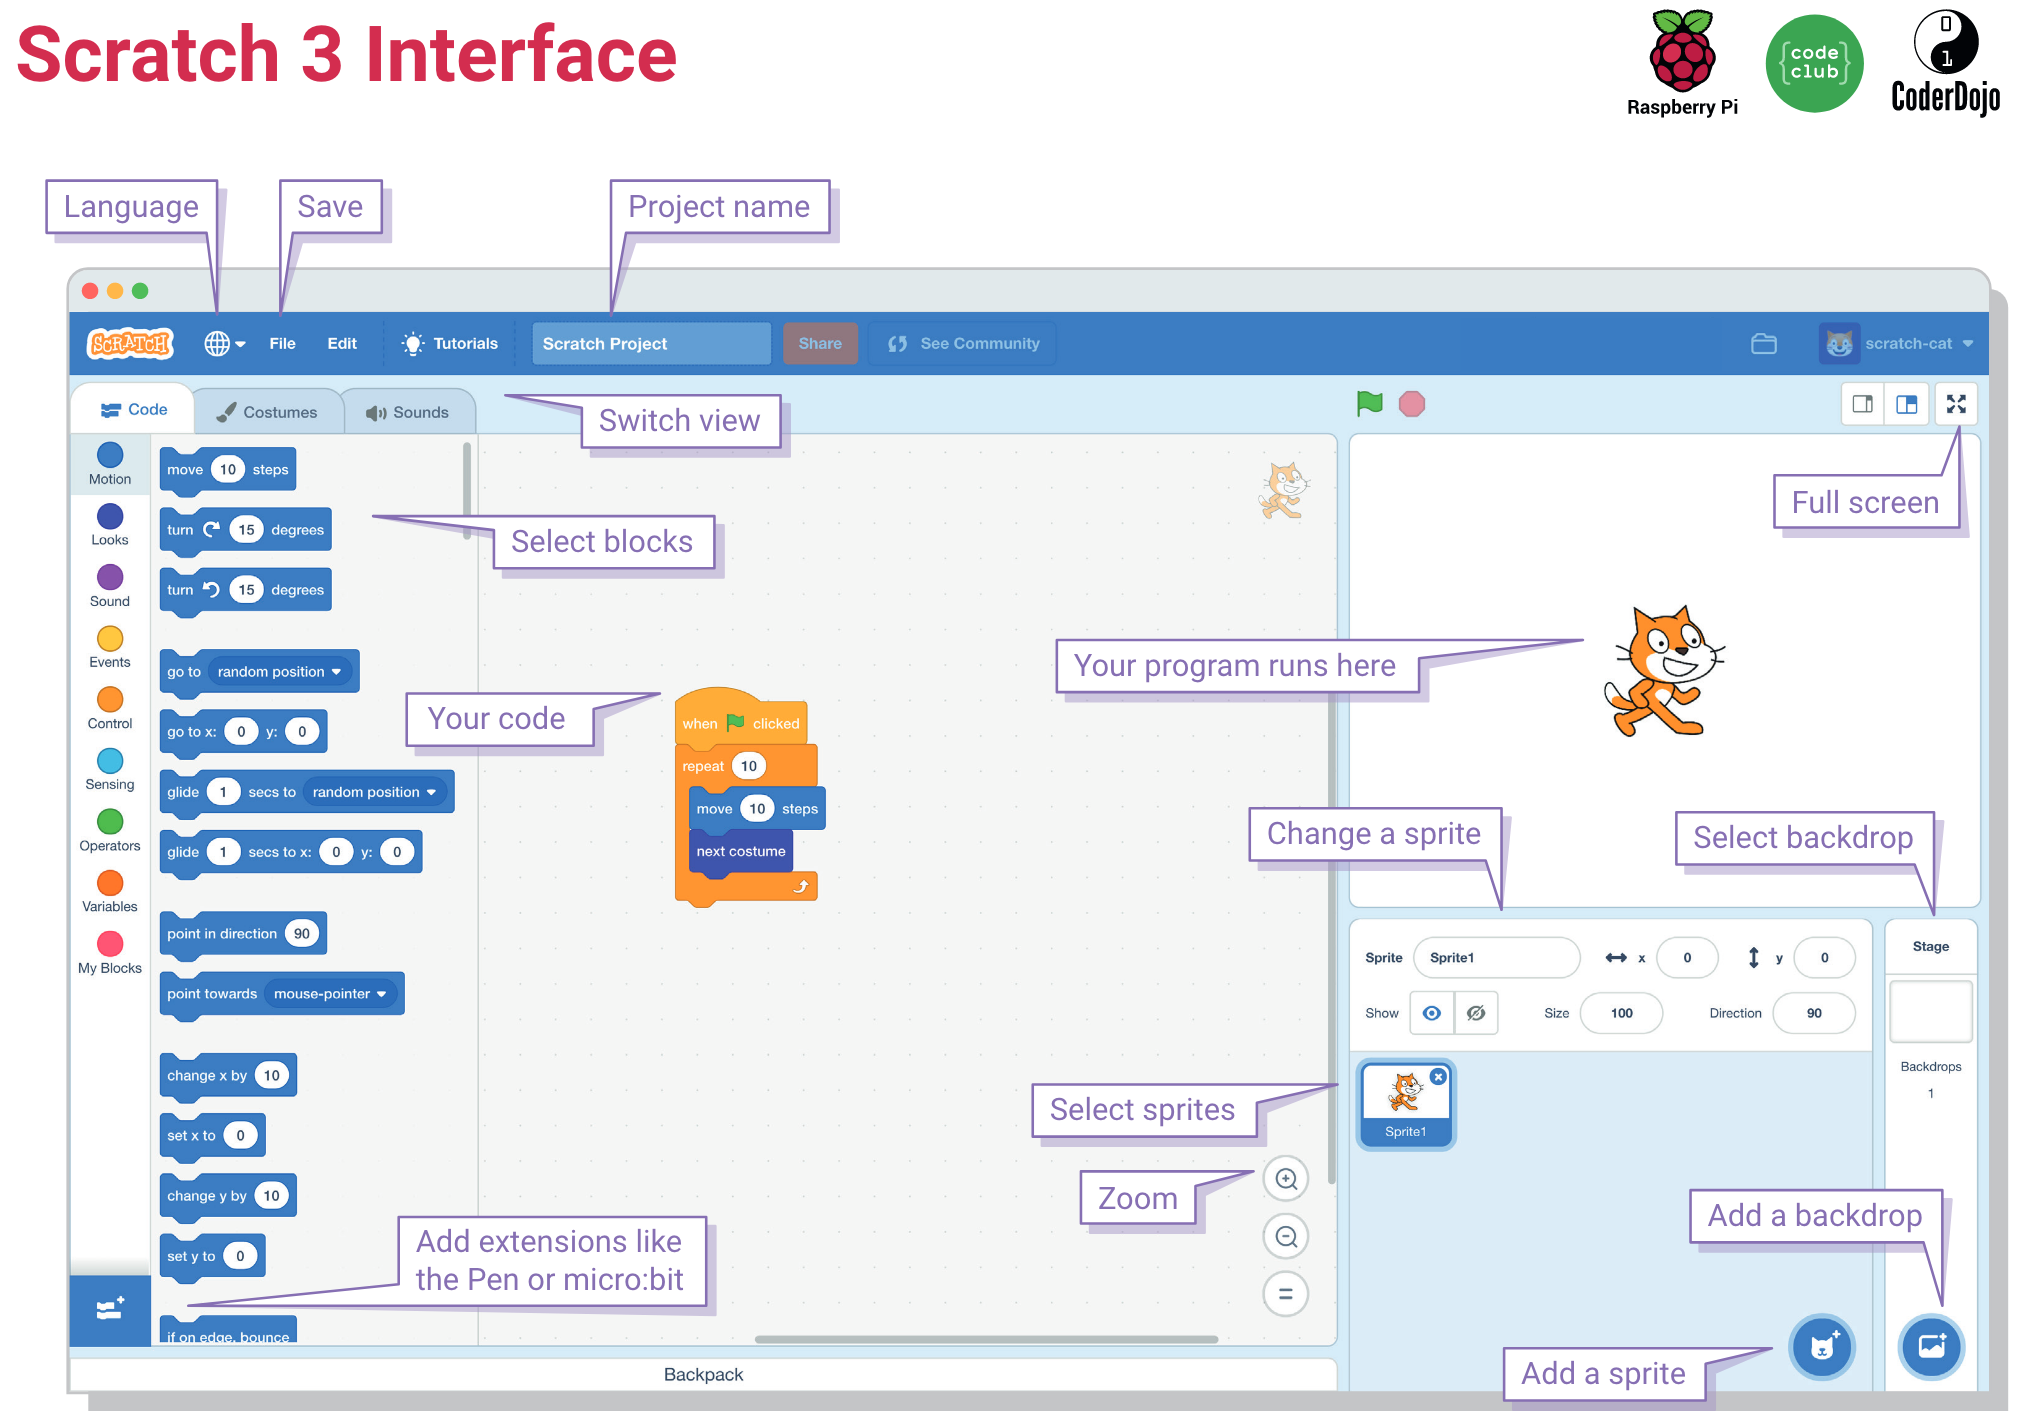 Scratch 3 interface with annotations